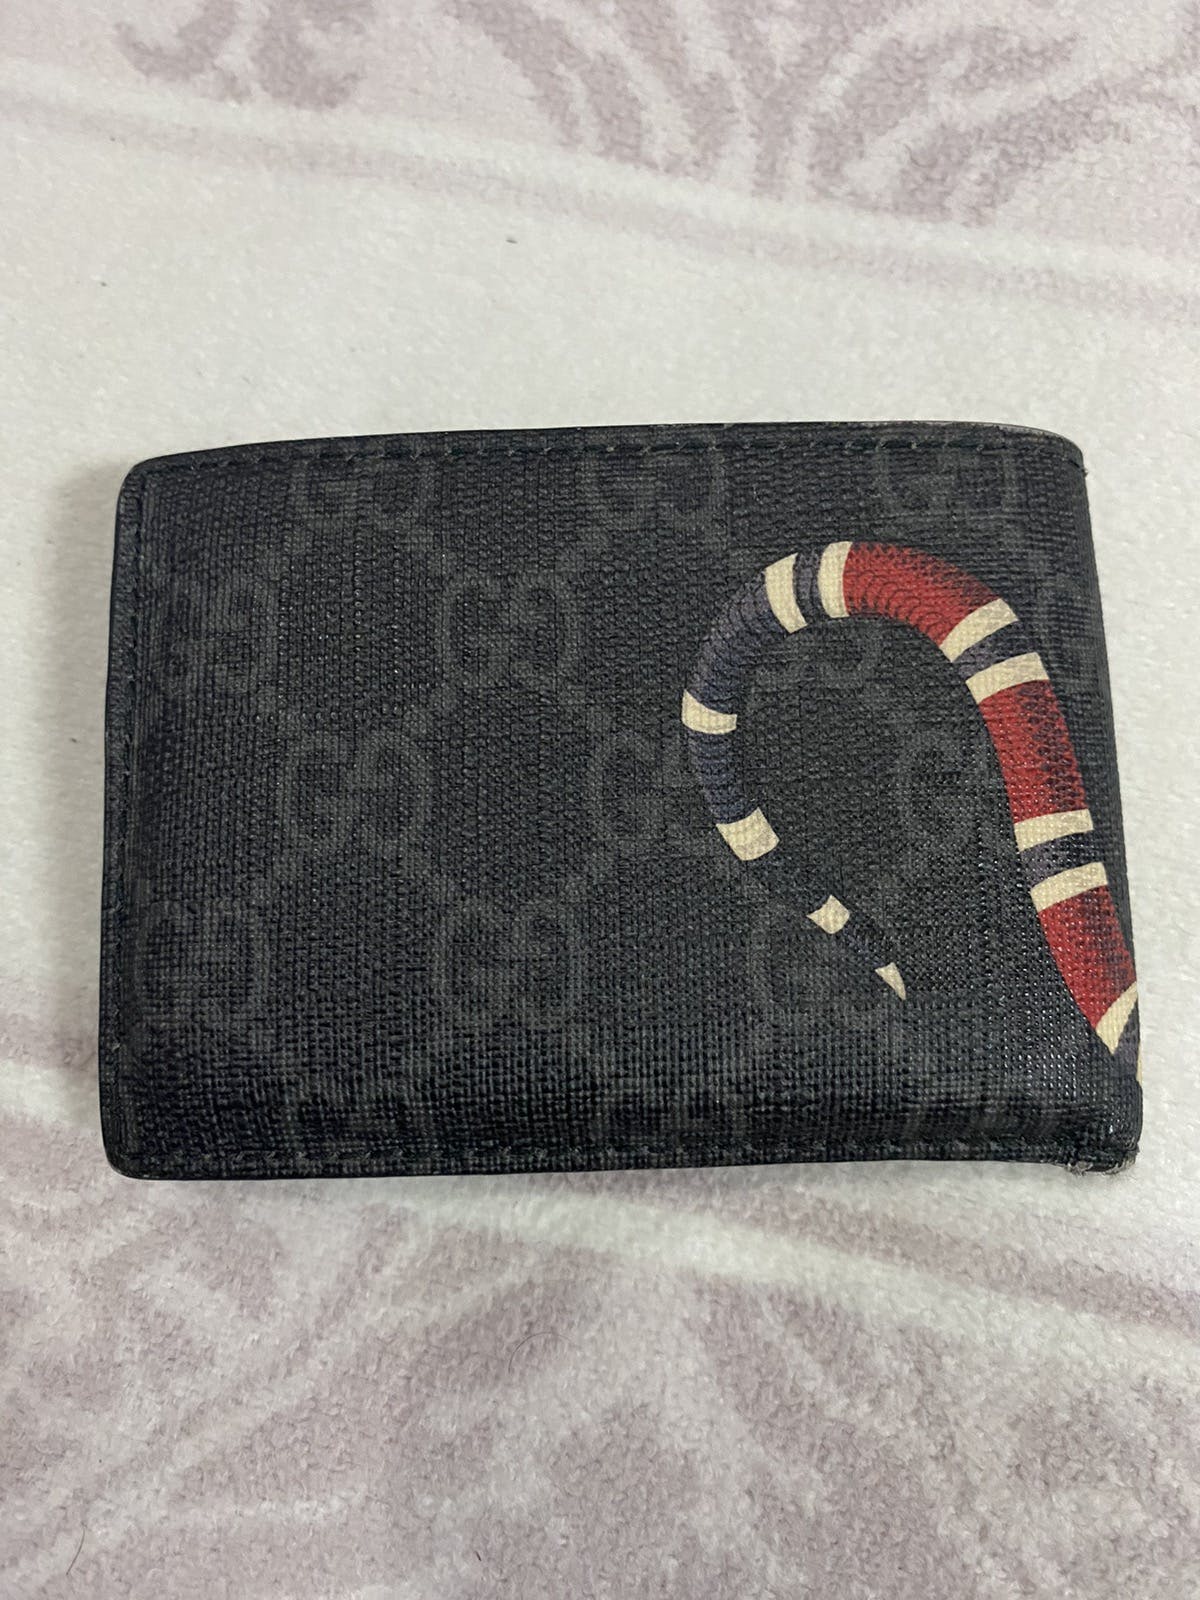 Authentic Gucci Snake Wallet - 14